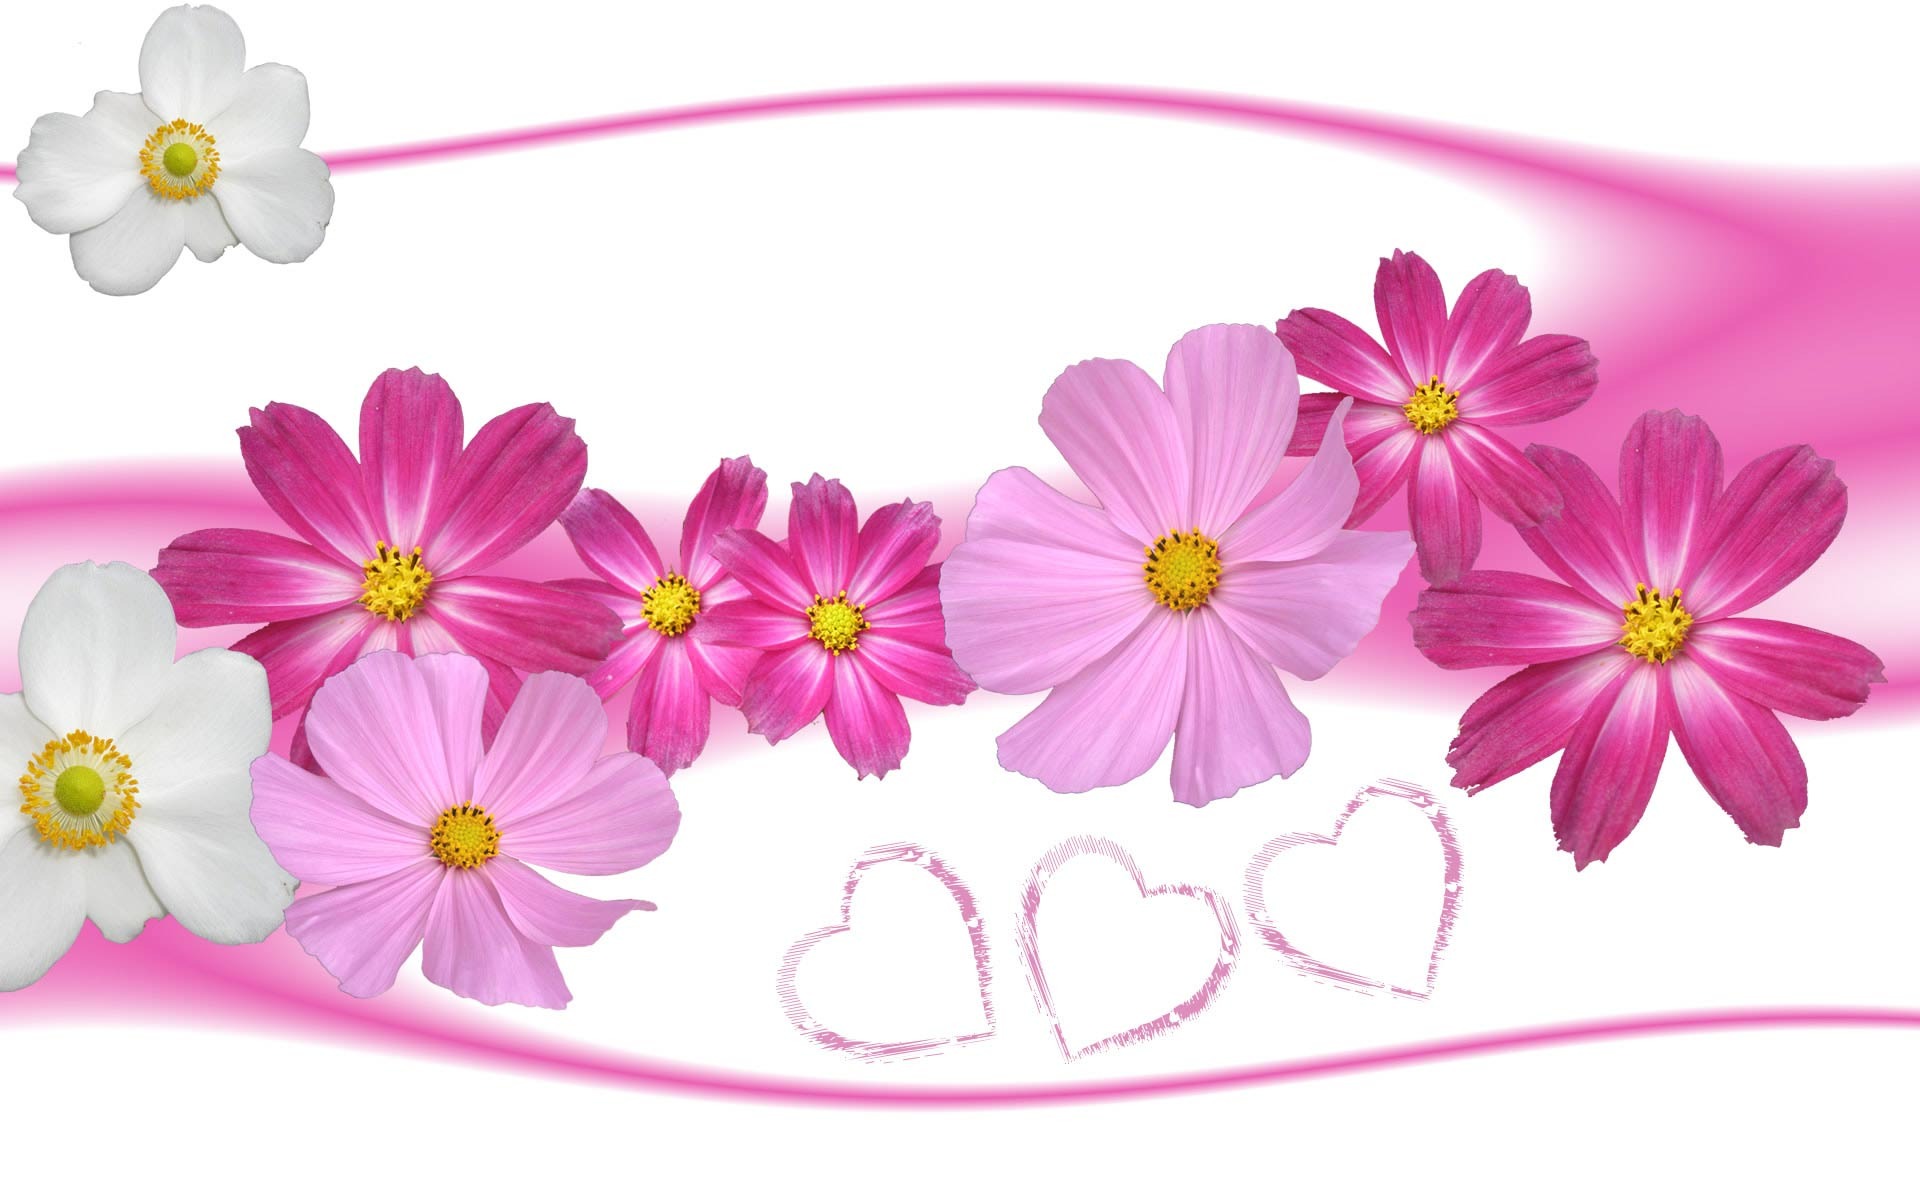 Pink Cosmos Flowers And Hearts Artistic Wallpaper